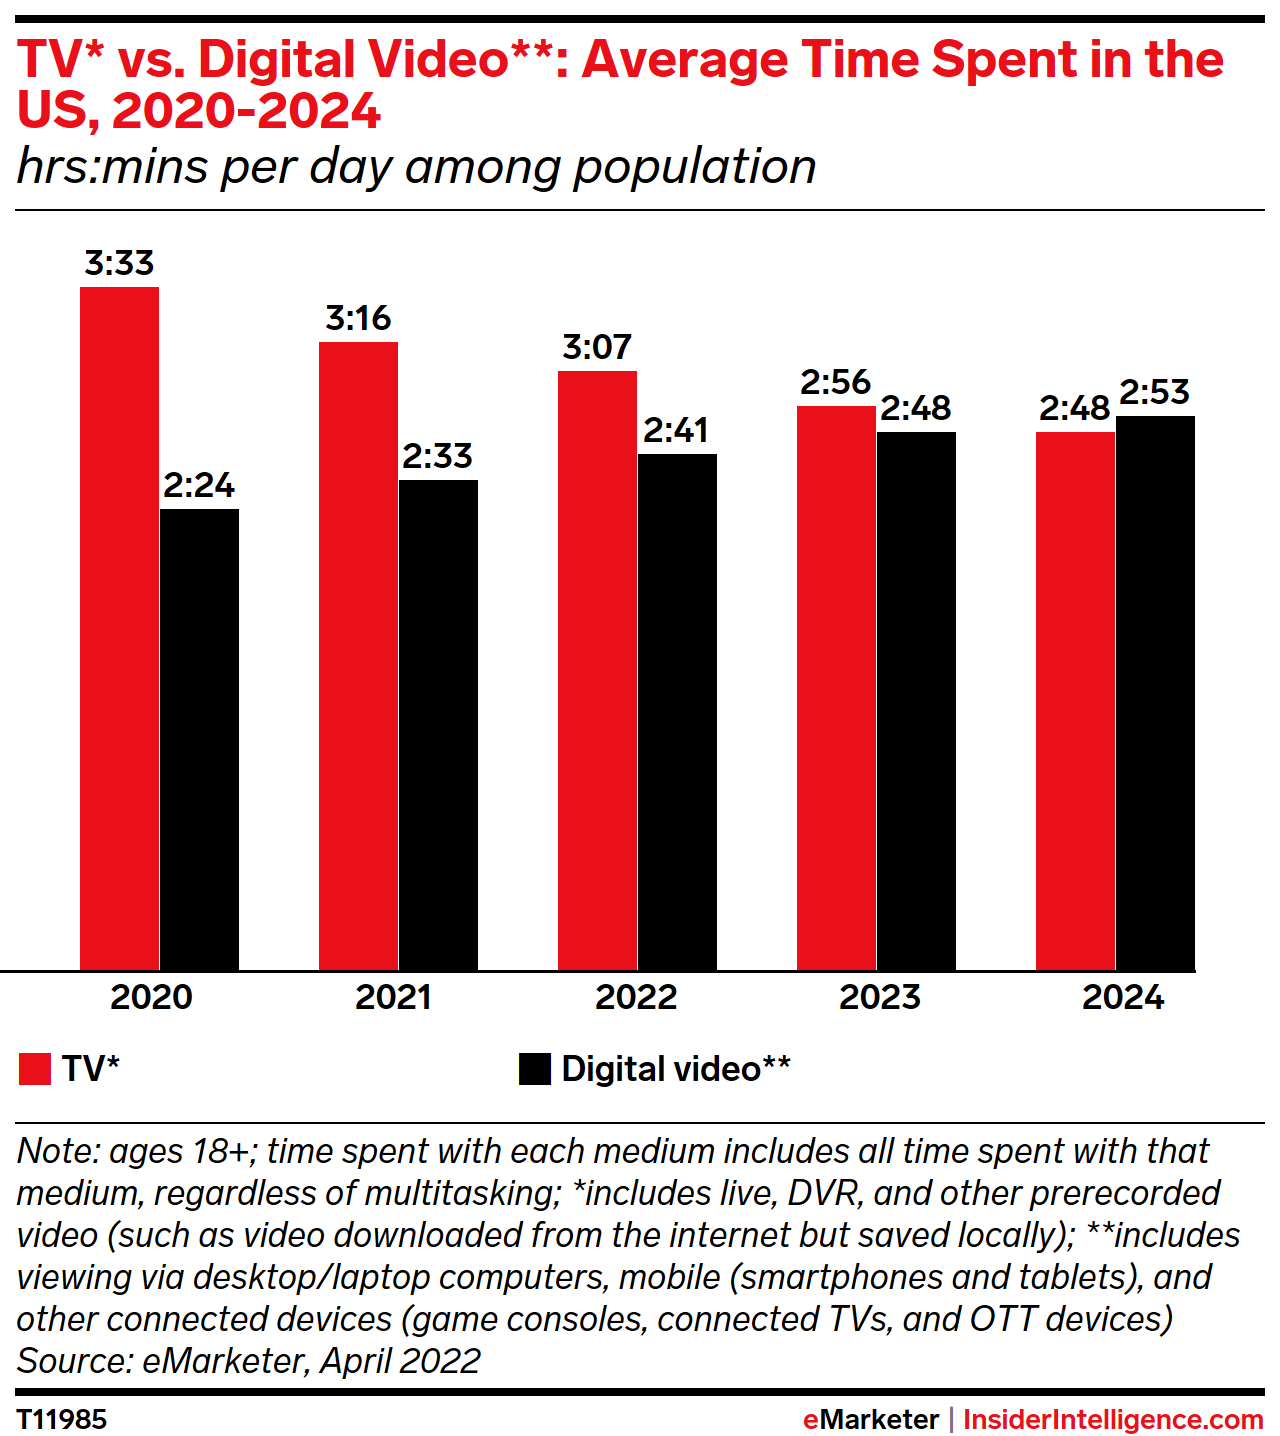 TV* vs. Digital Video**: Average Time Spent in the US, 2020-2024 (hrs:mins per day among population)